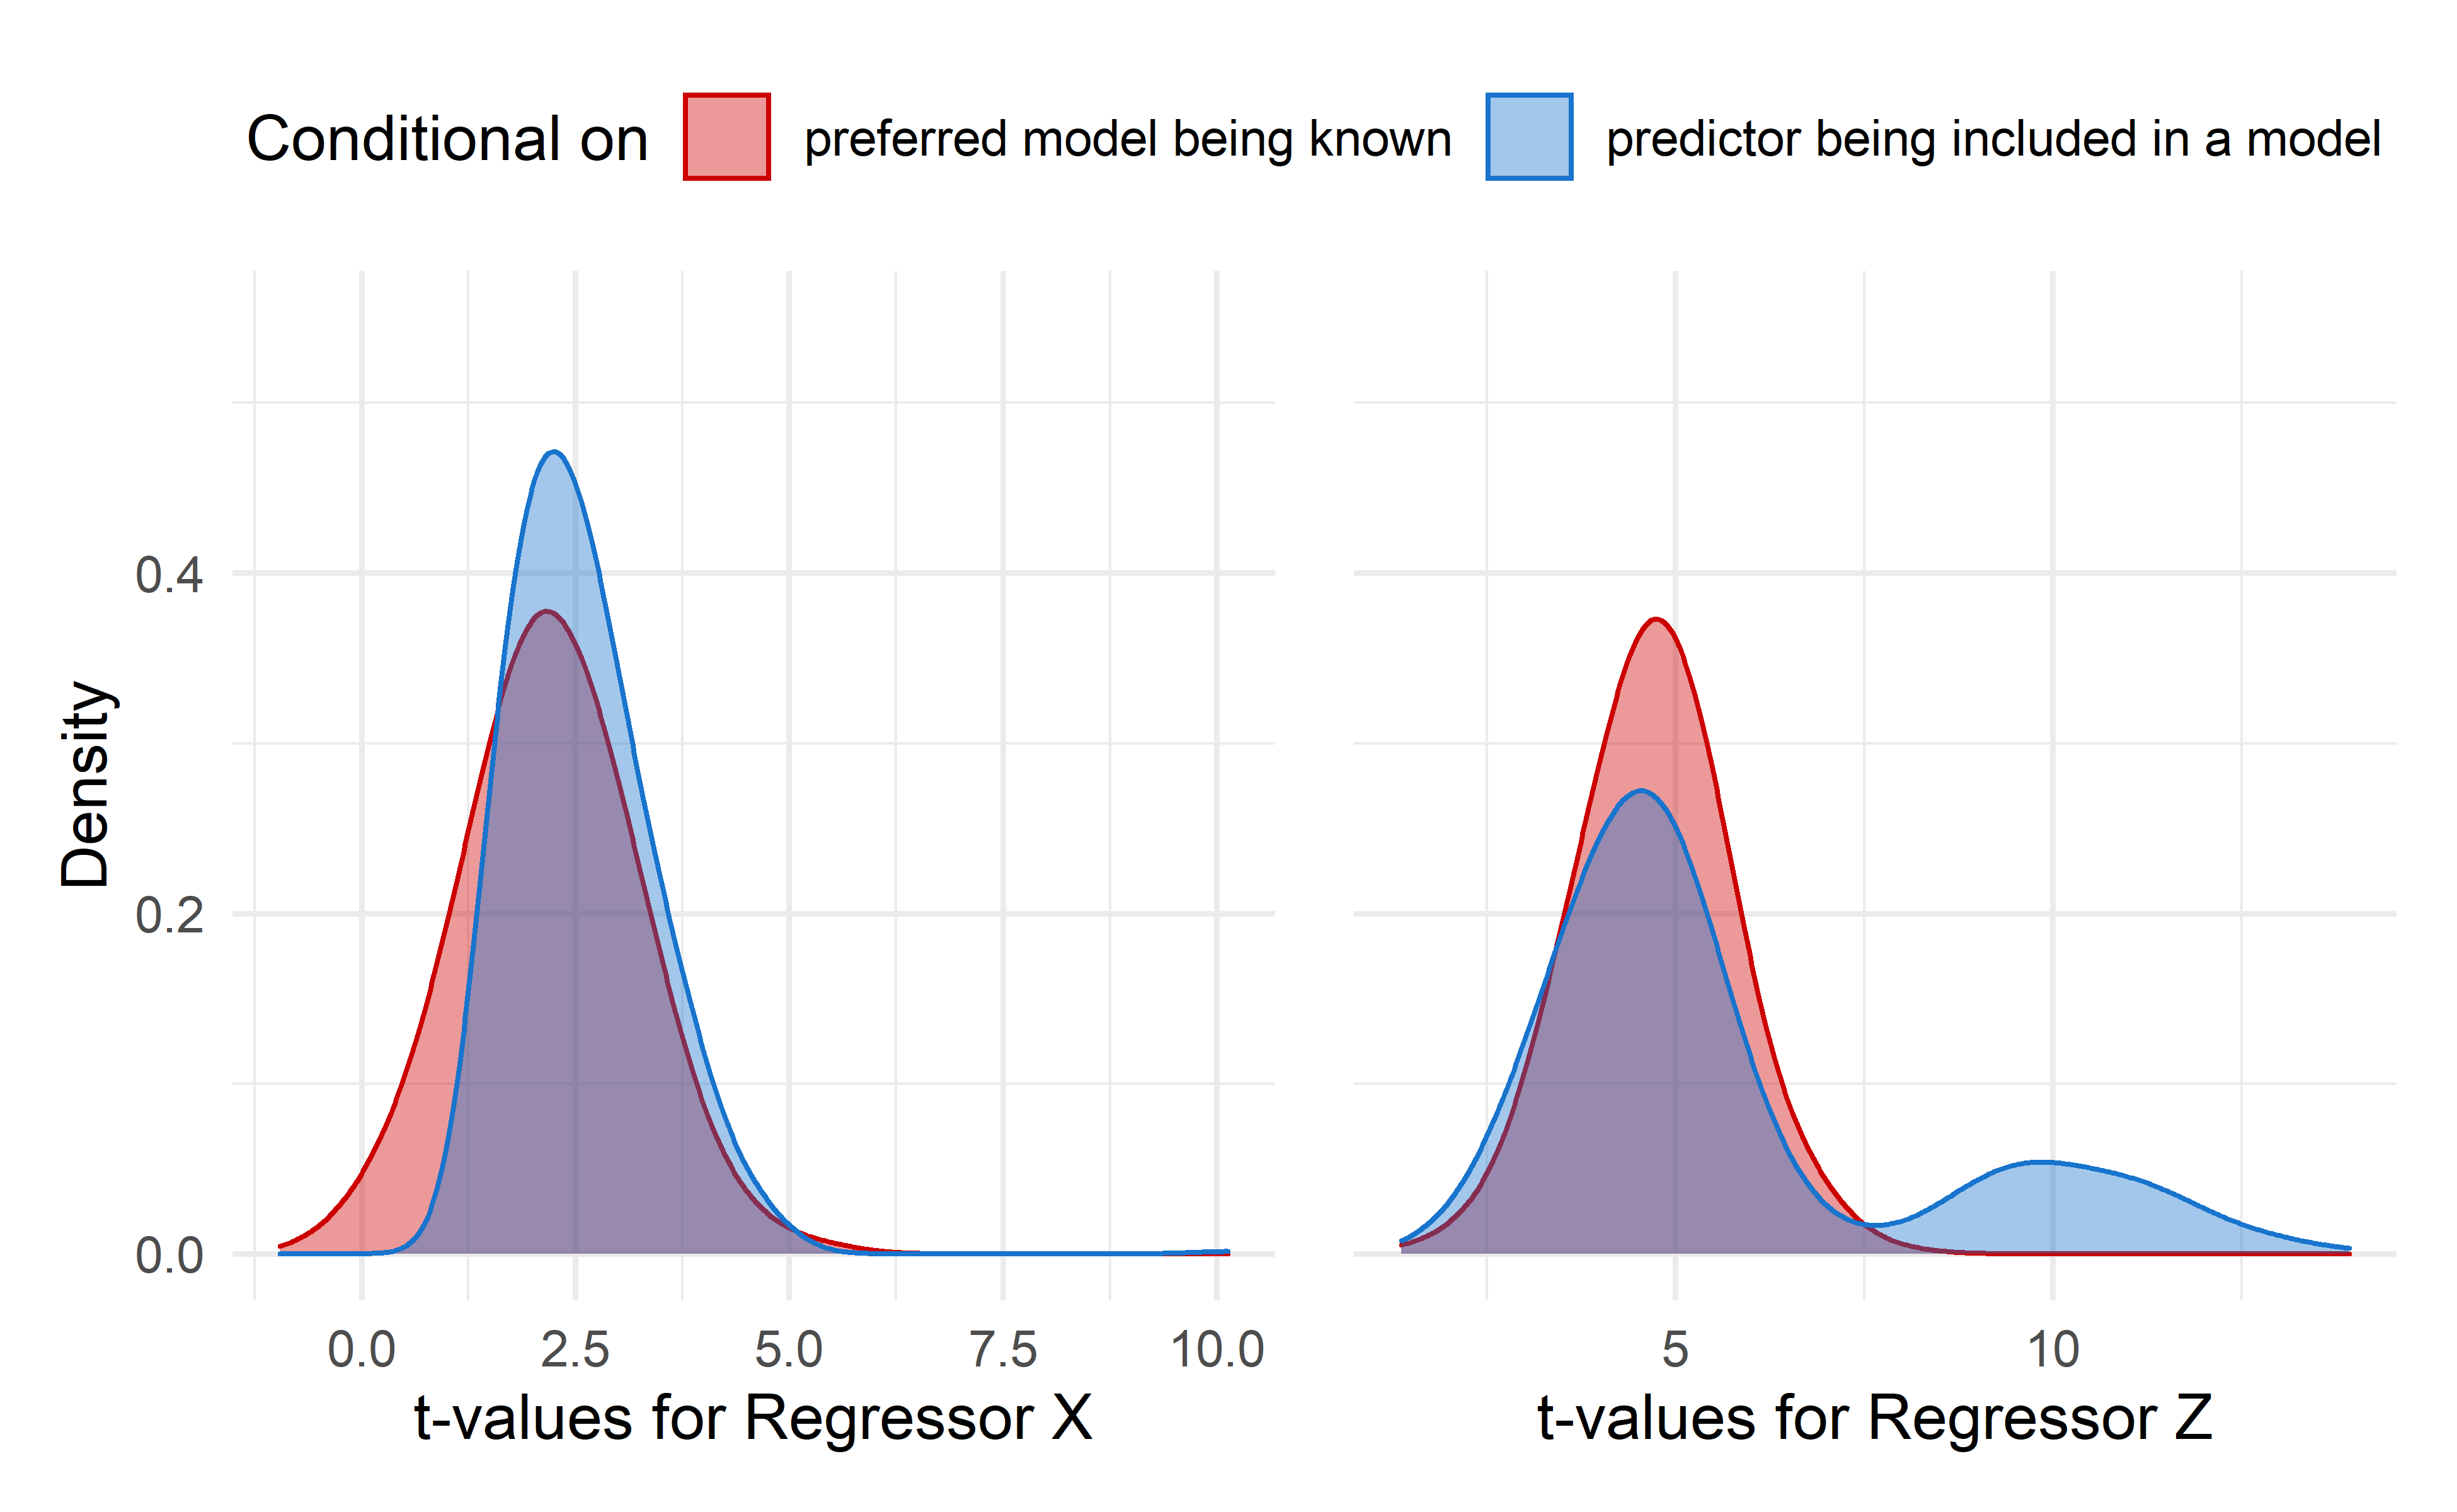 Stepwise regression sampling distributions of the regression coefficient *t*-values for regressors X and Z. Red density plot is is conditional on the preferred model being known. The blue density plot is conditional on the regressor being included in a model